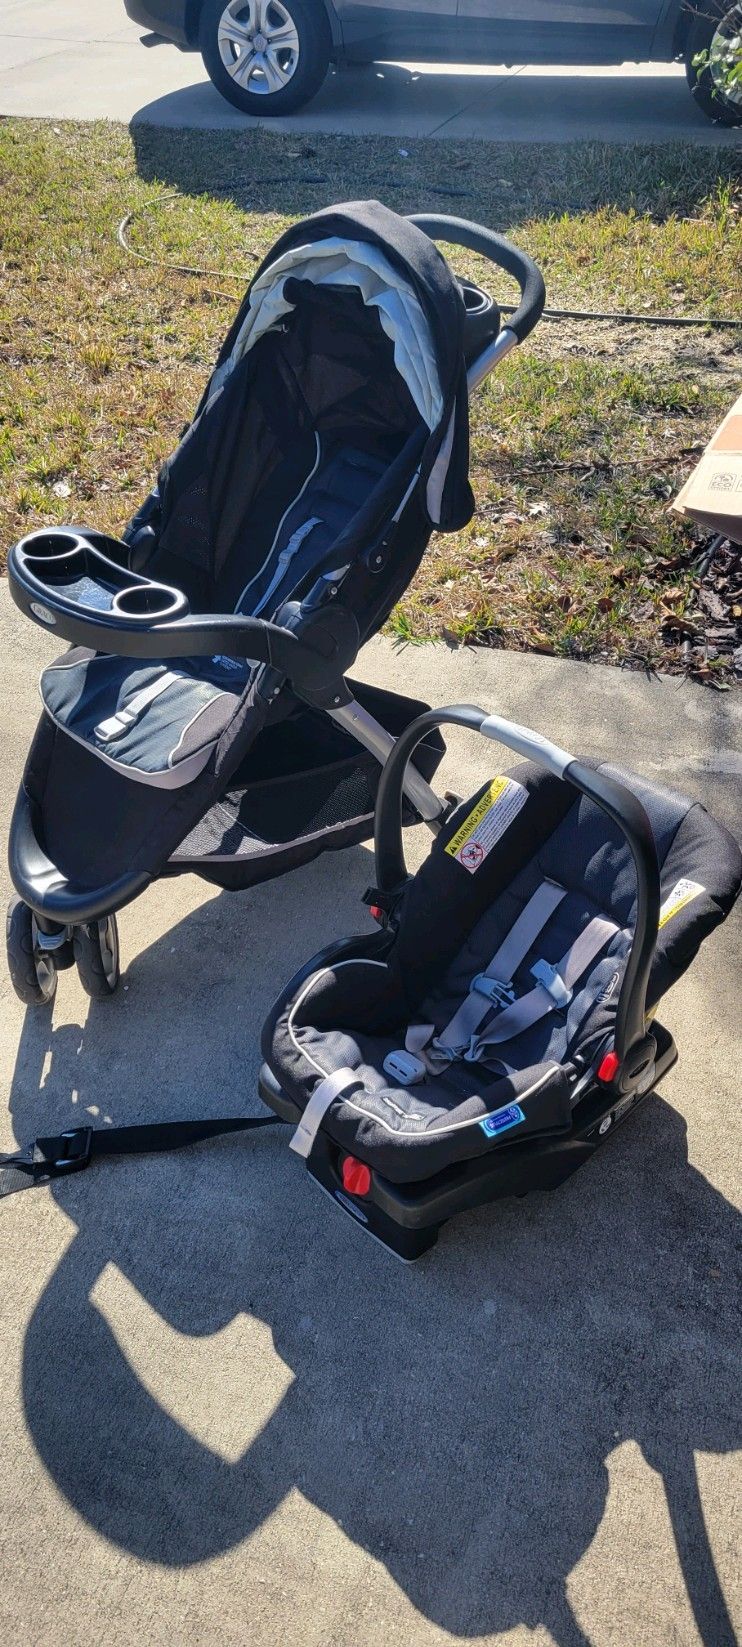 Graco Sports Edition Stroller and Car Seat